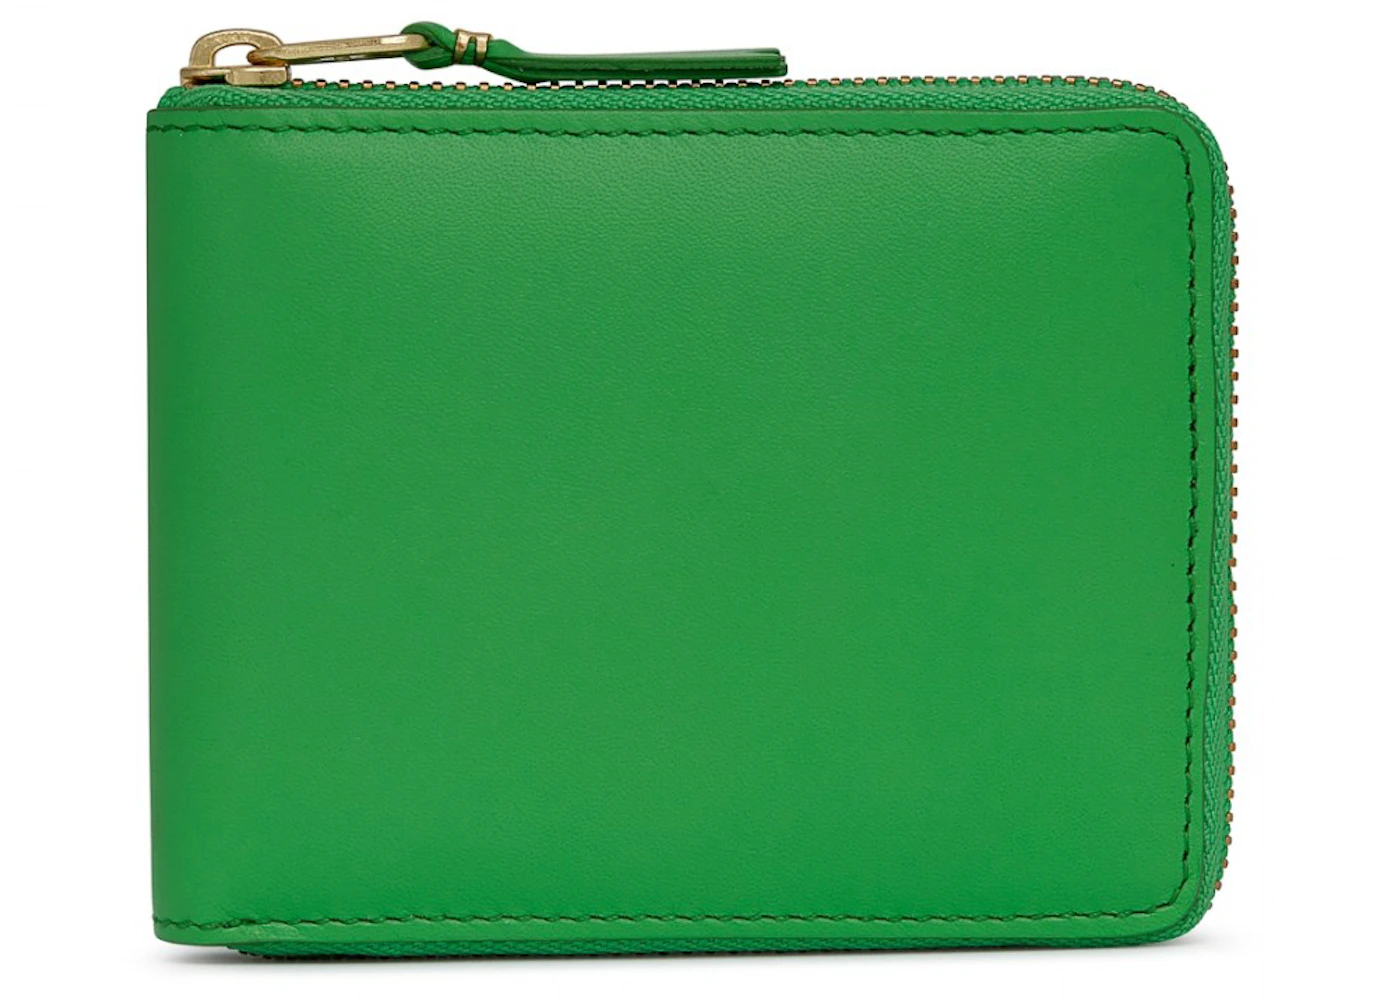 Comme des Garcons SA7100 Colour Wallet Green in Leather with Gold-tone - US